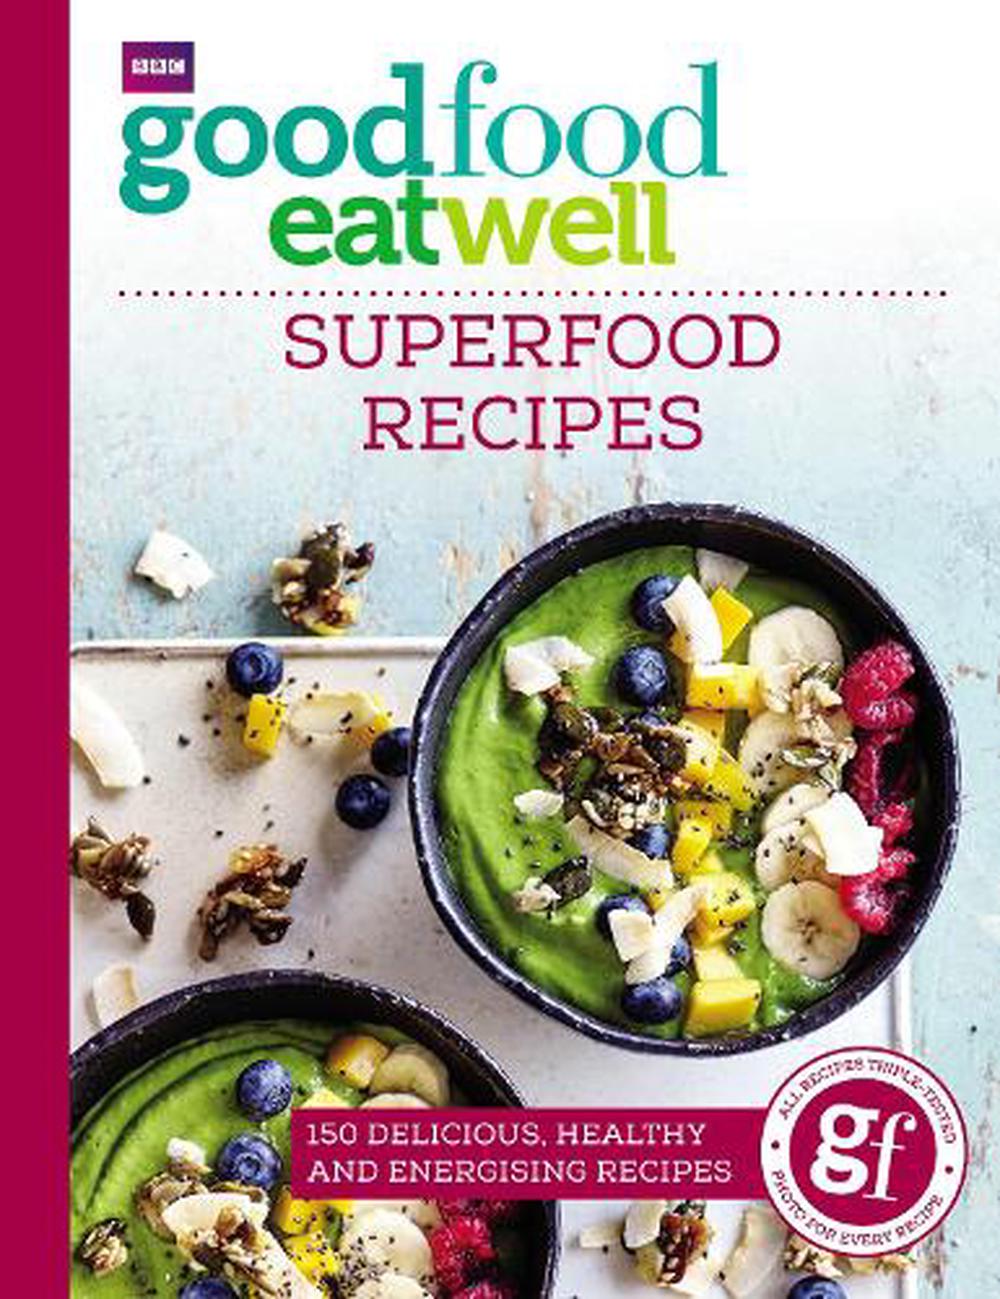 at　by　Recipes　Superfood　Nile　Eat　The　Good　Good　Buy　Paperback,　Food　Food　9781785941955　online　Well:　Guides,